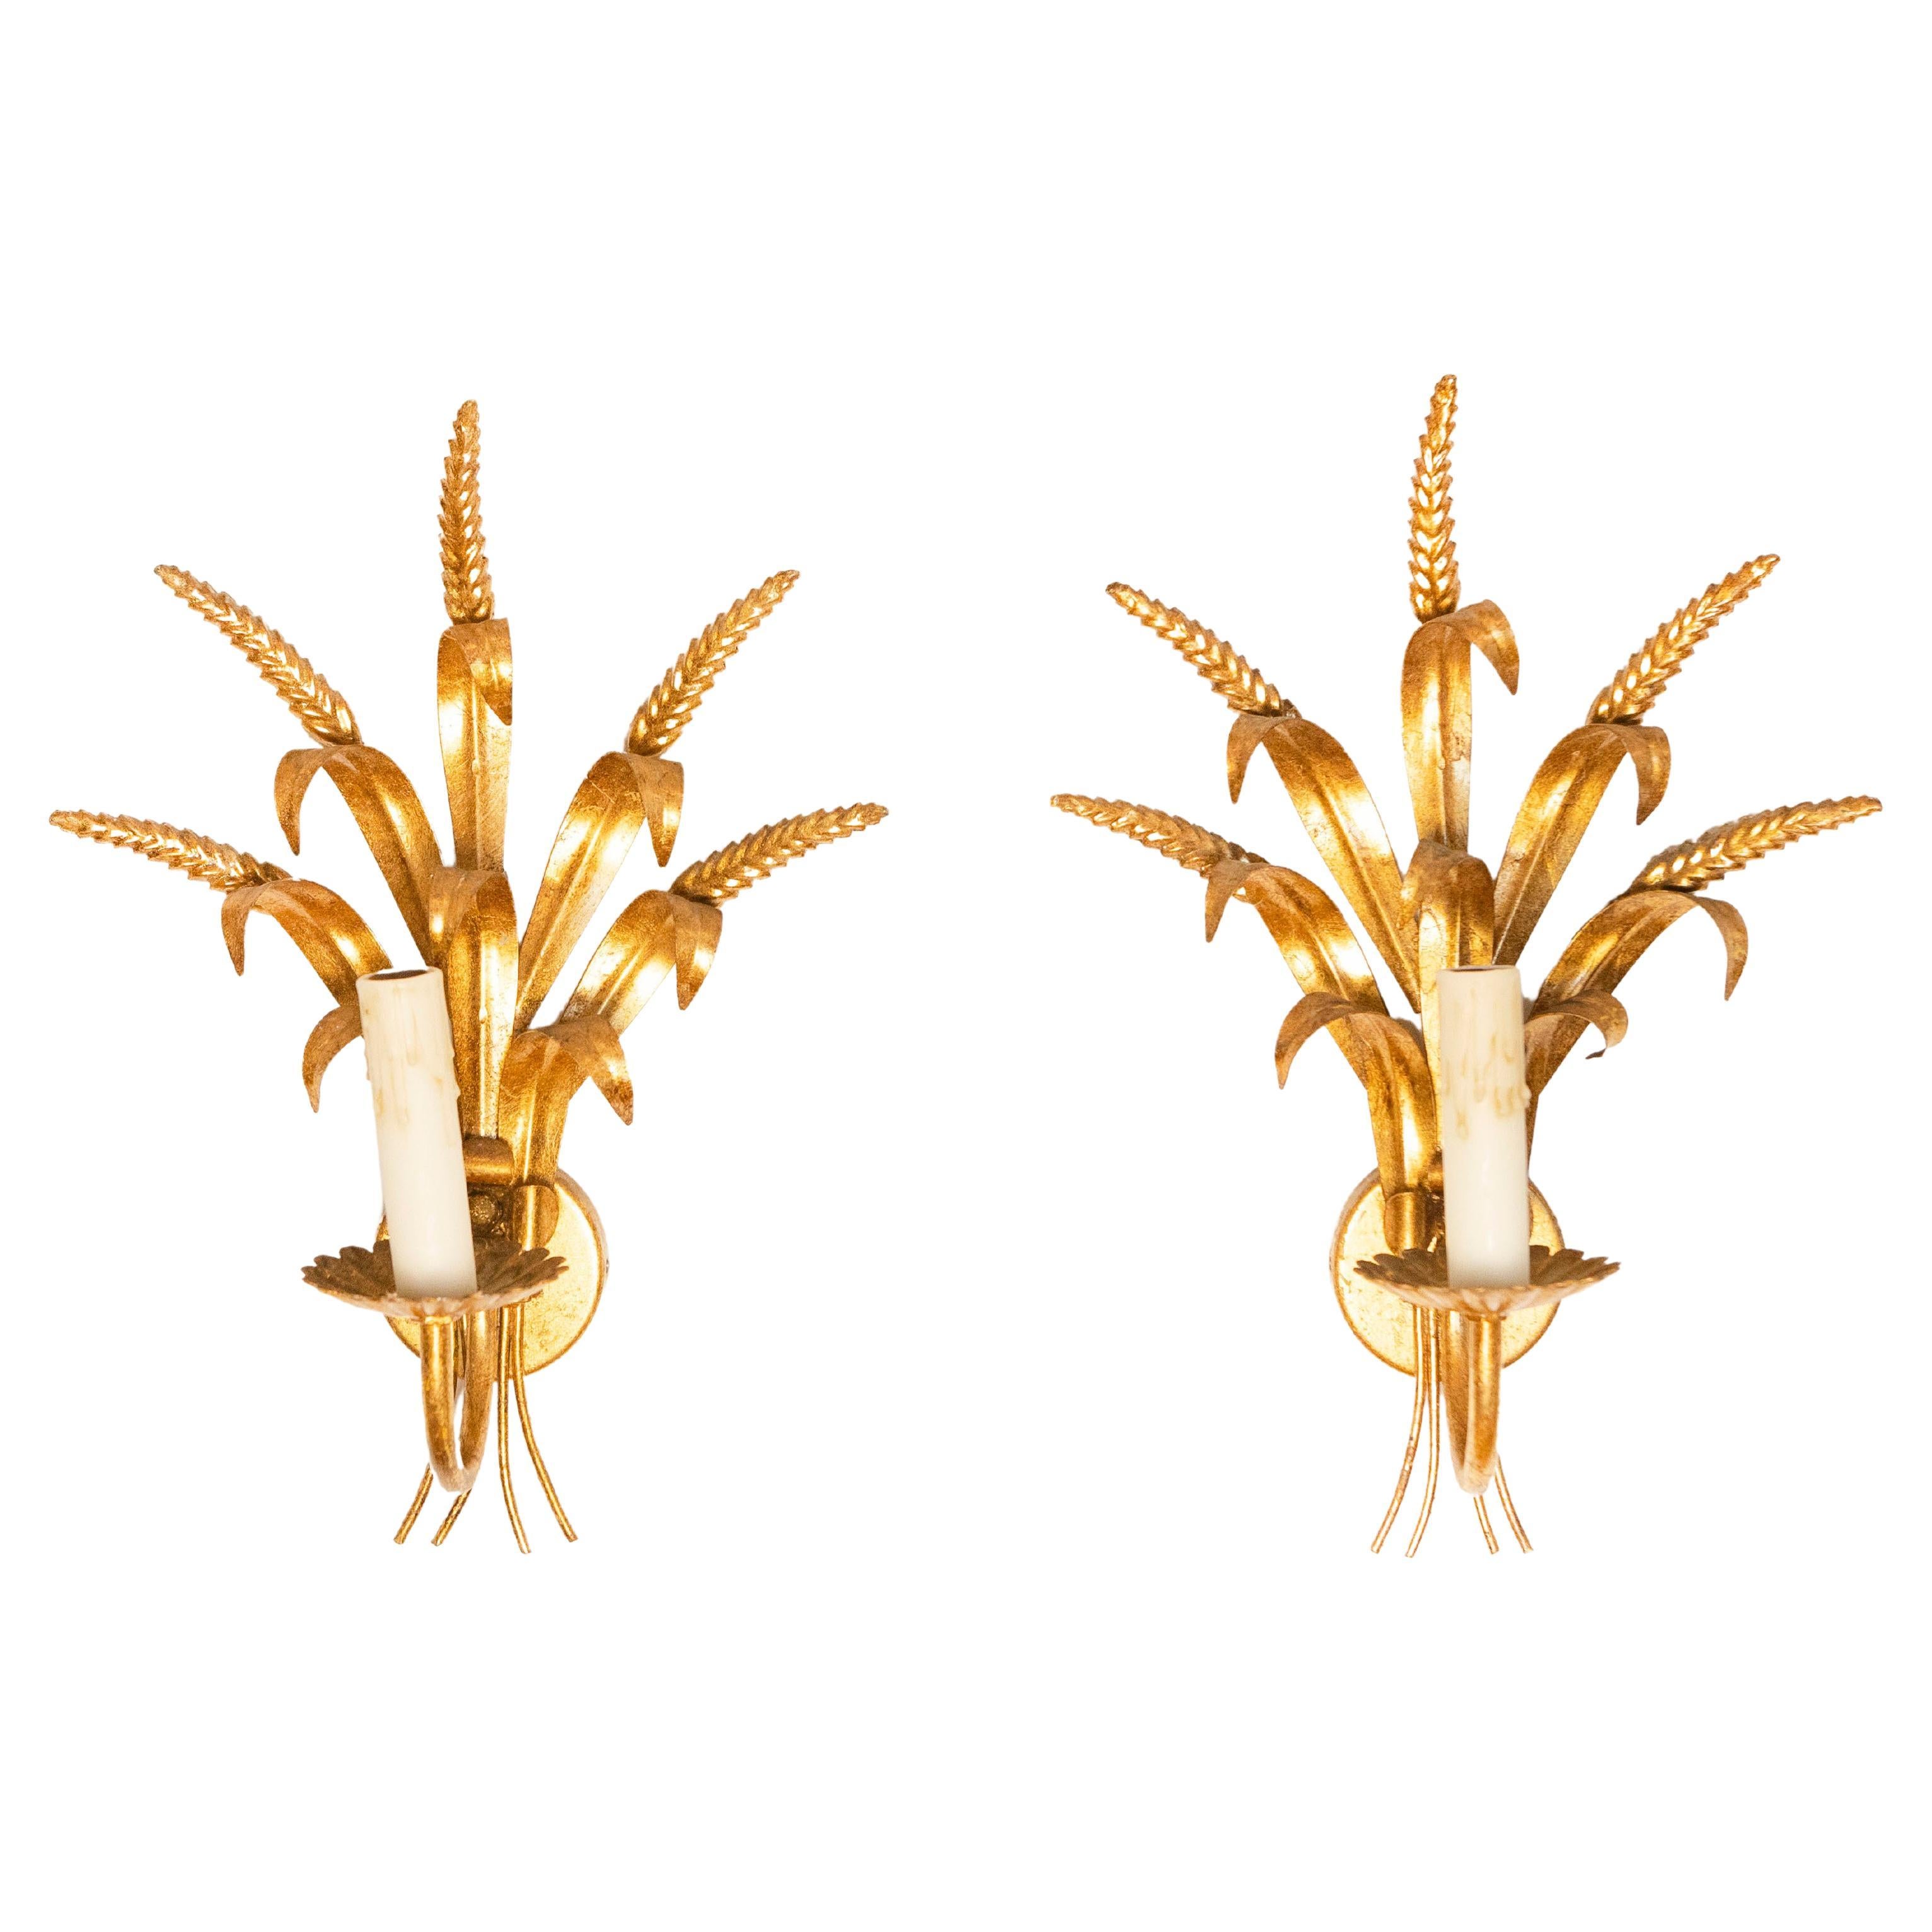 Pair of French Gilt Metal Ear of Wheat Sconces Inspired By Coco Chanel, Wired